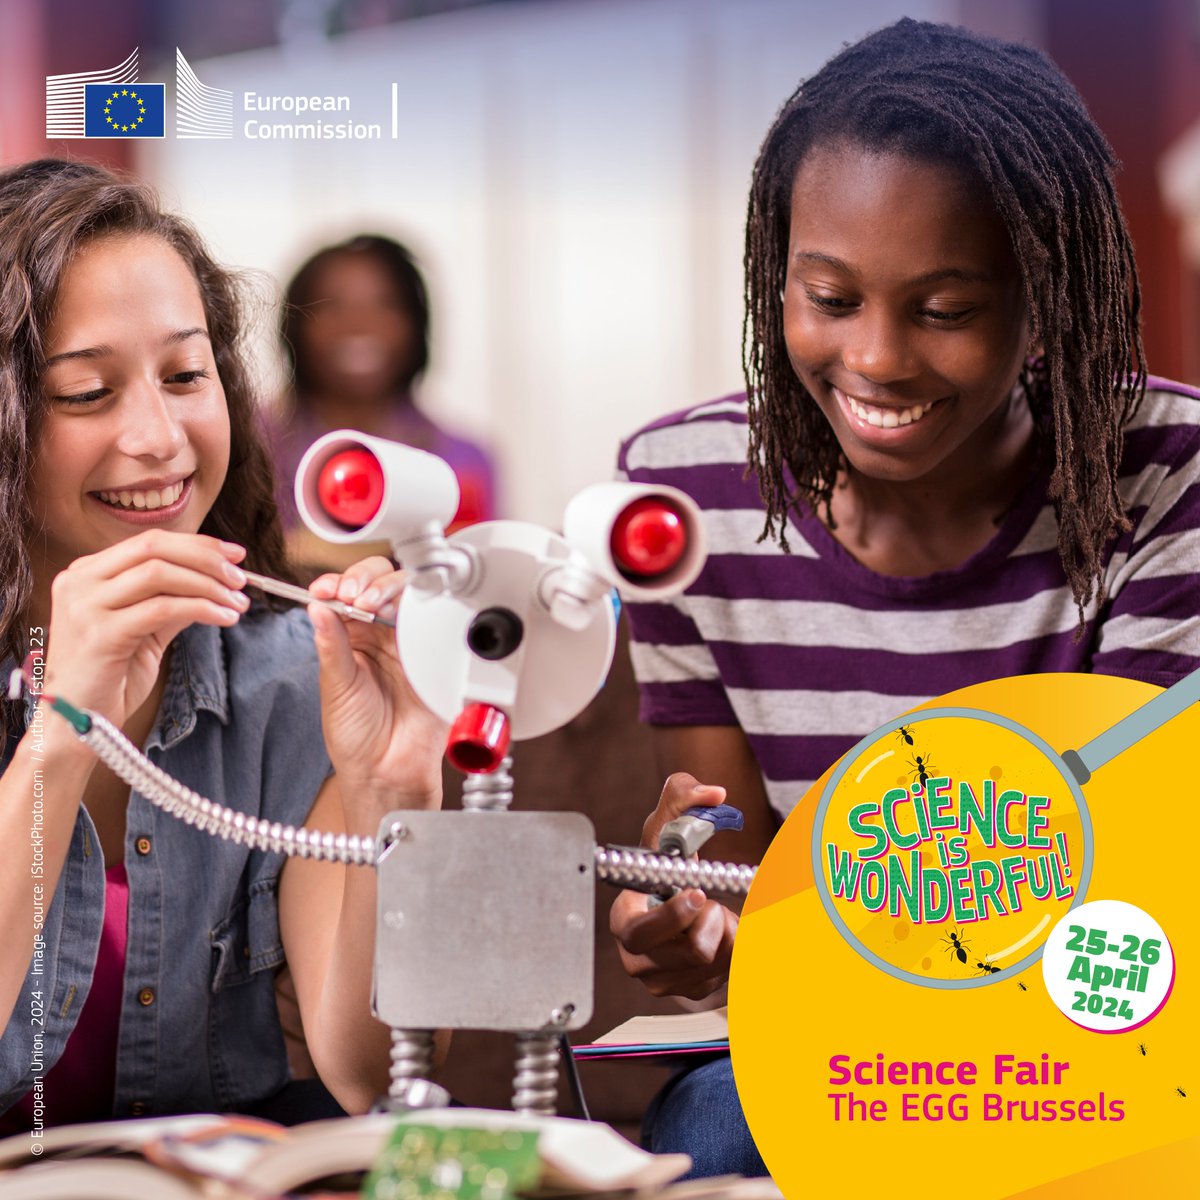 Join us on Thursday & Friday at @TheEggBrussels for two exciting days of our #ScienceIsWonderful fair! Go hands-on, join science shows, see experiments & play games — be it with your school or family. The best part? Entry is 100% free! More details ➡️ europa.eu/!F49vCw